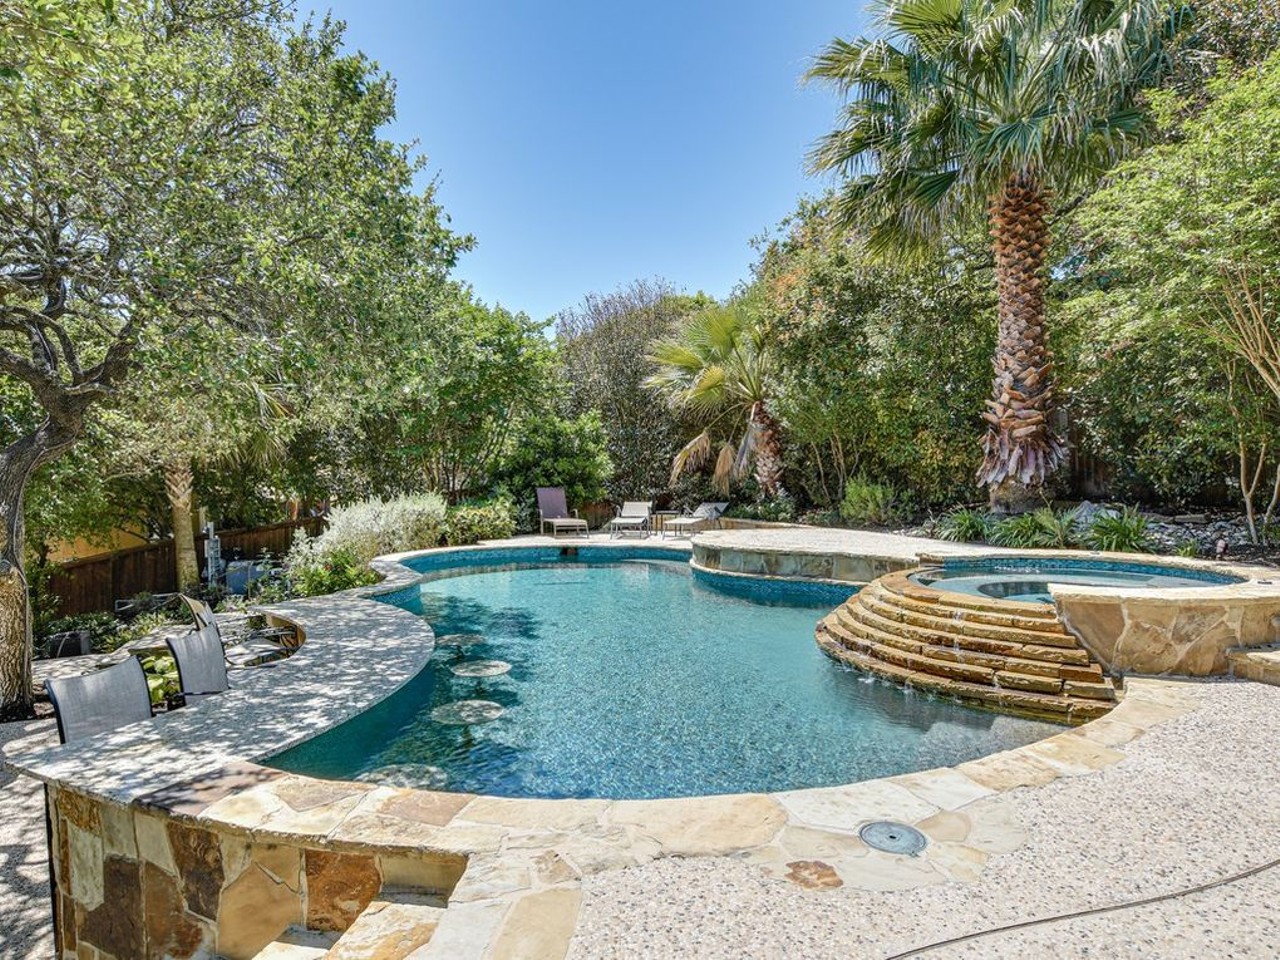 2915 Ivory Crk
$839,900
With stools underwater to sit on, all this pool is missing is the bartender to serve drinks at this stay-at-home poolside bar.